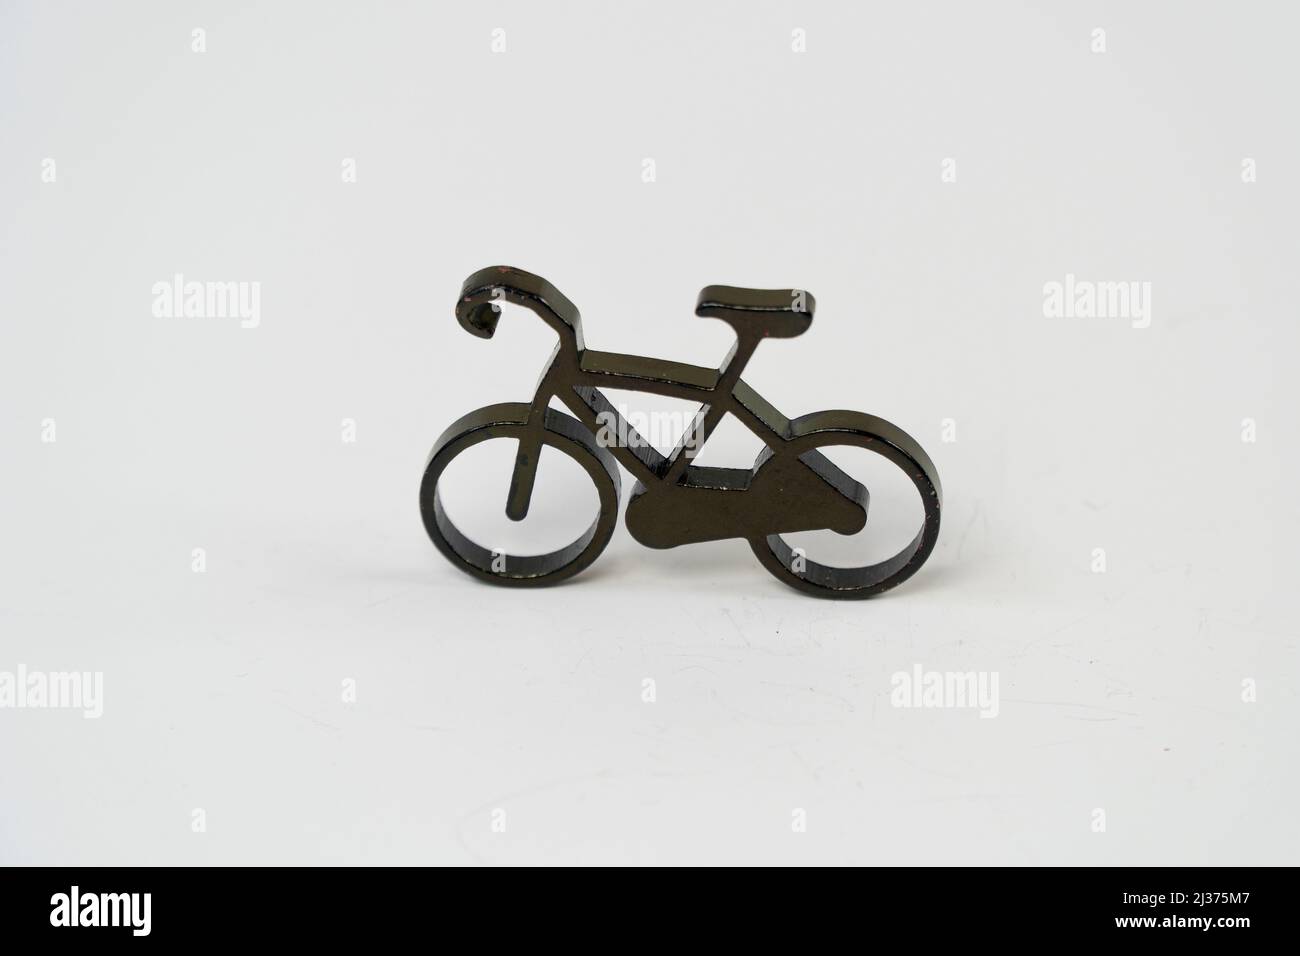 Bicycle toy object isolated on white background, black bike miniature bcycle icon key chain, solid metal color sembol front view Stock Photo